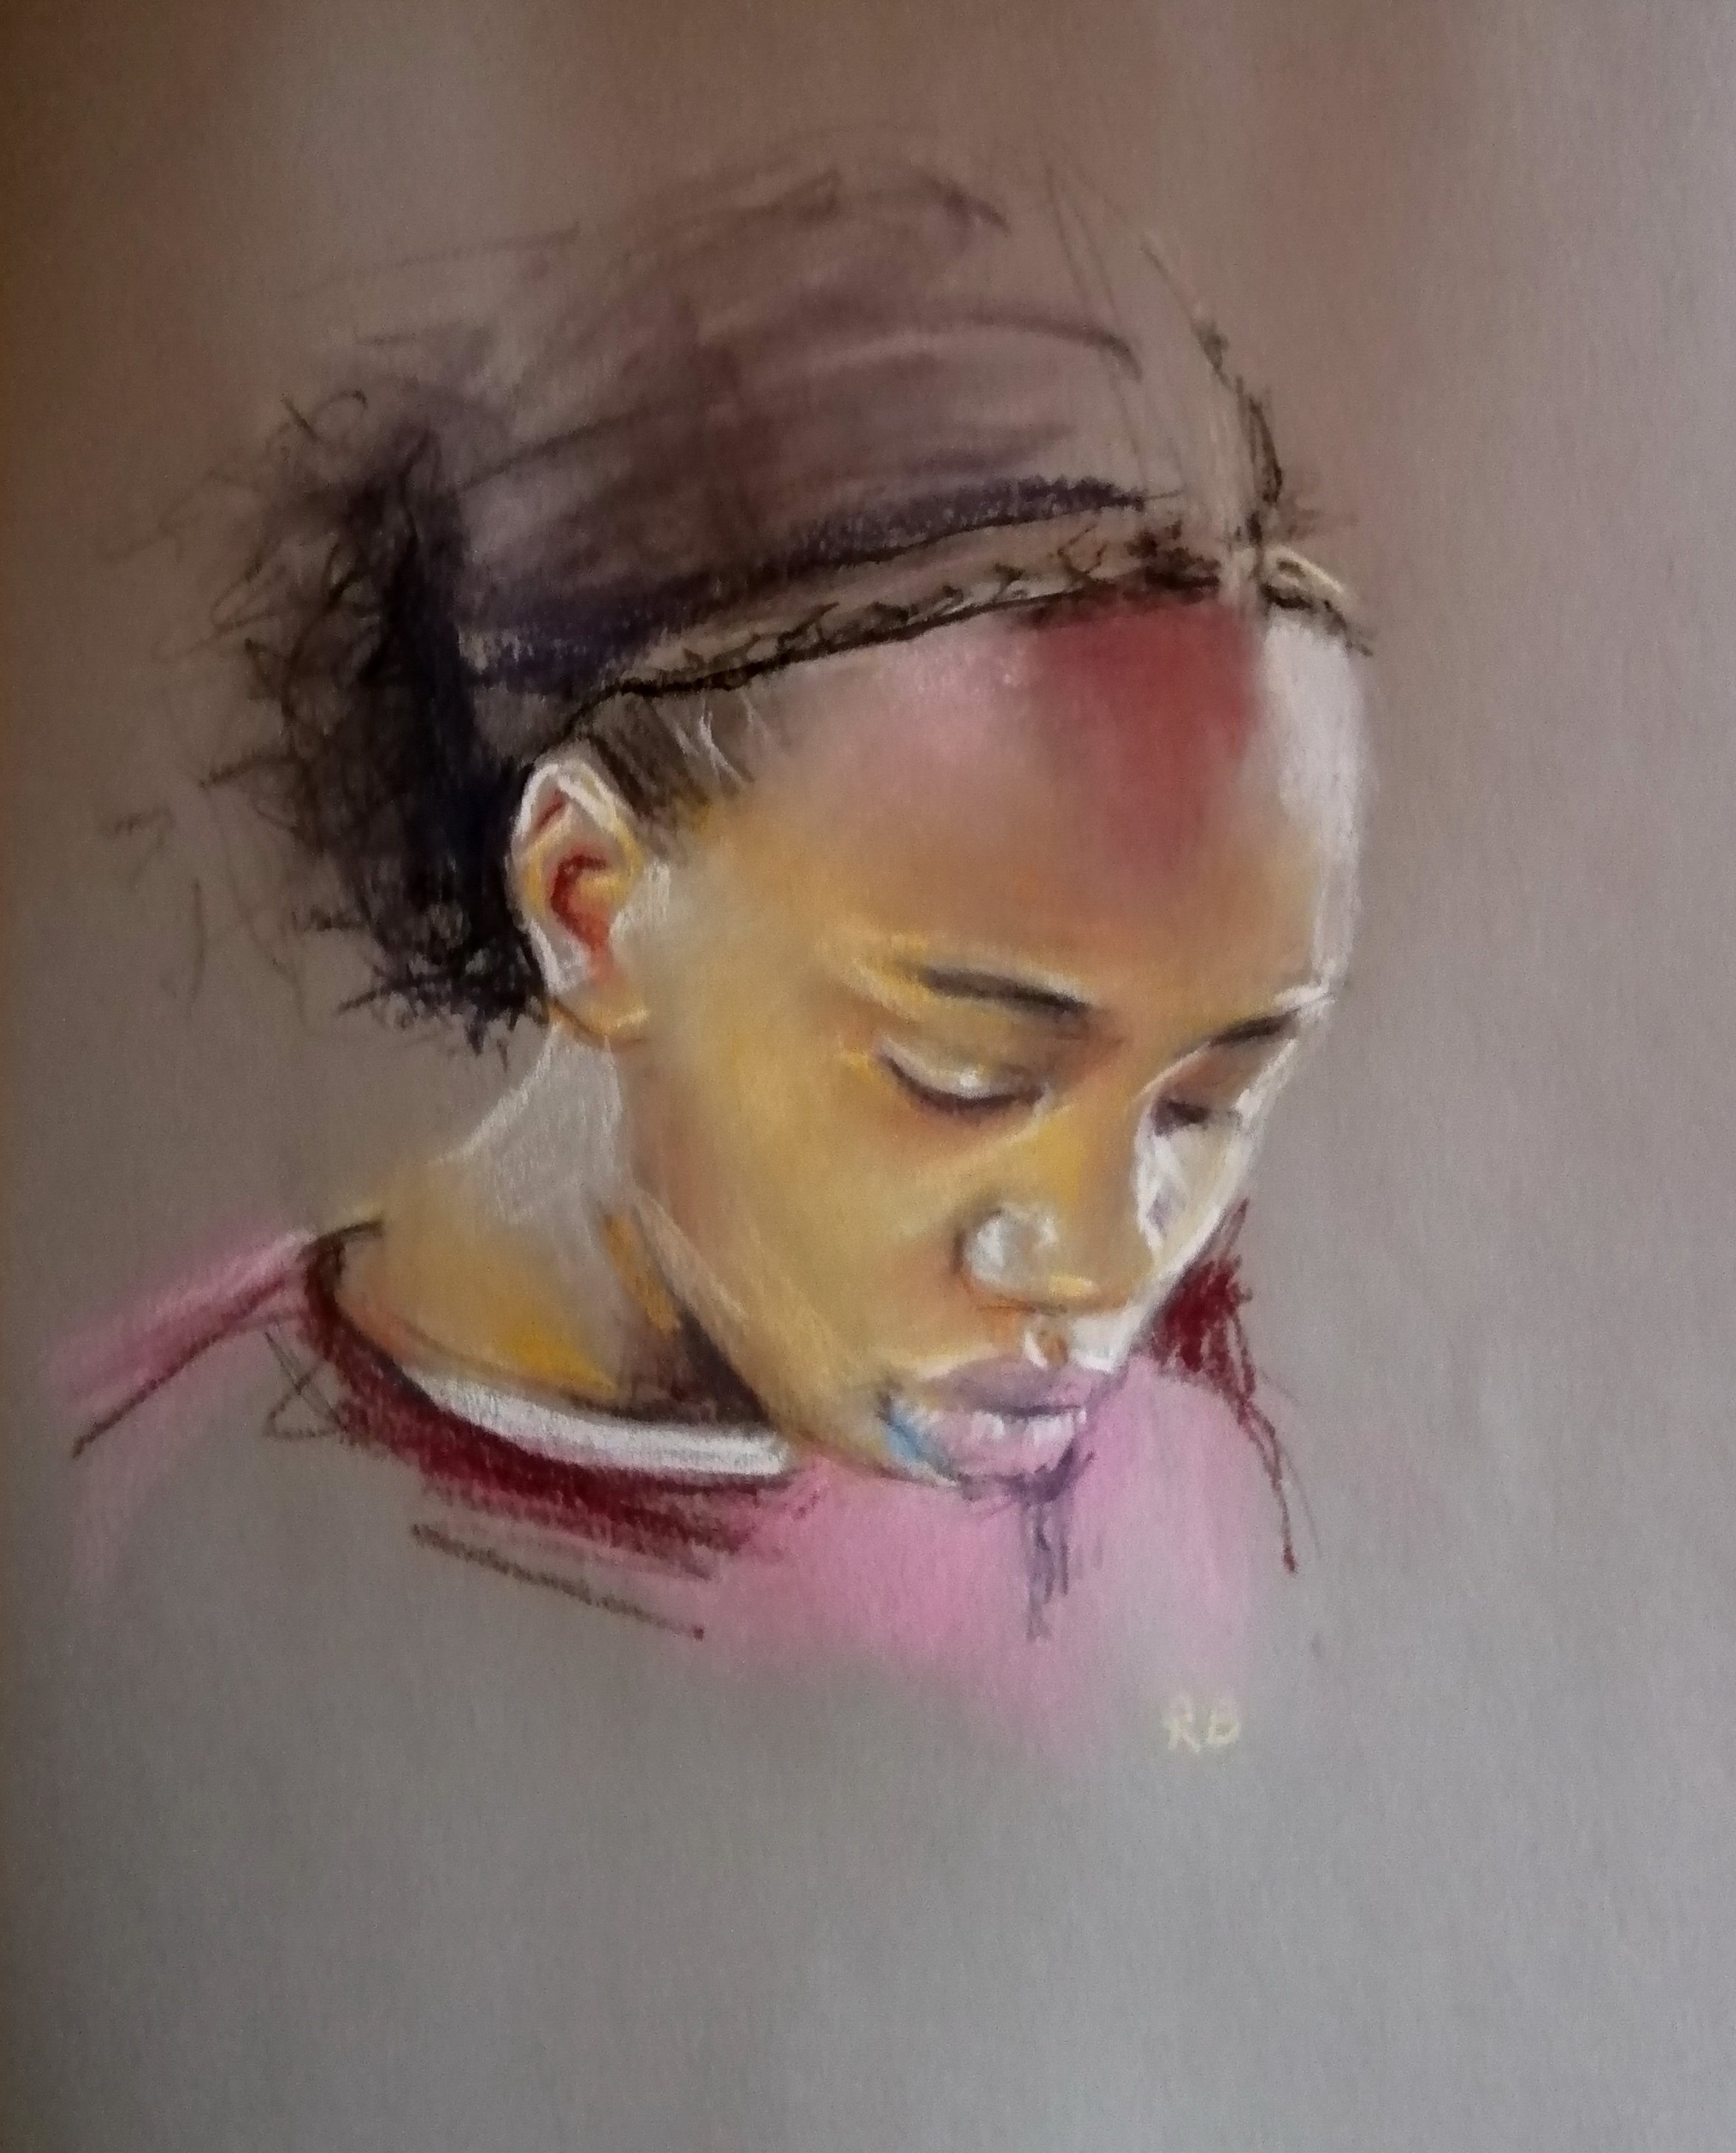  Surfing  Pastel and pencil  £400  A soft pastel drawing of a young girl deep in thought as she concentrates on her phone, surfing the internet. The ambiguous title, which could take us either inward, surveying the internet, or out on the ocean waves